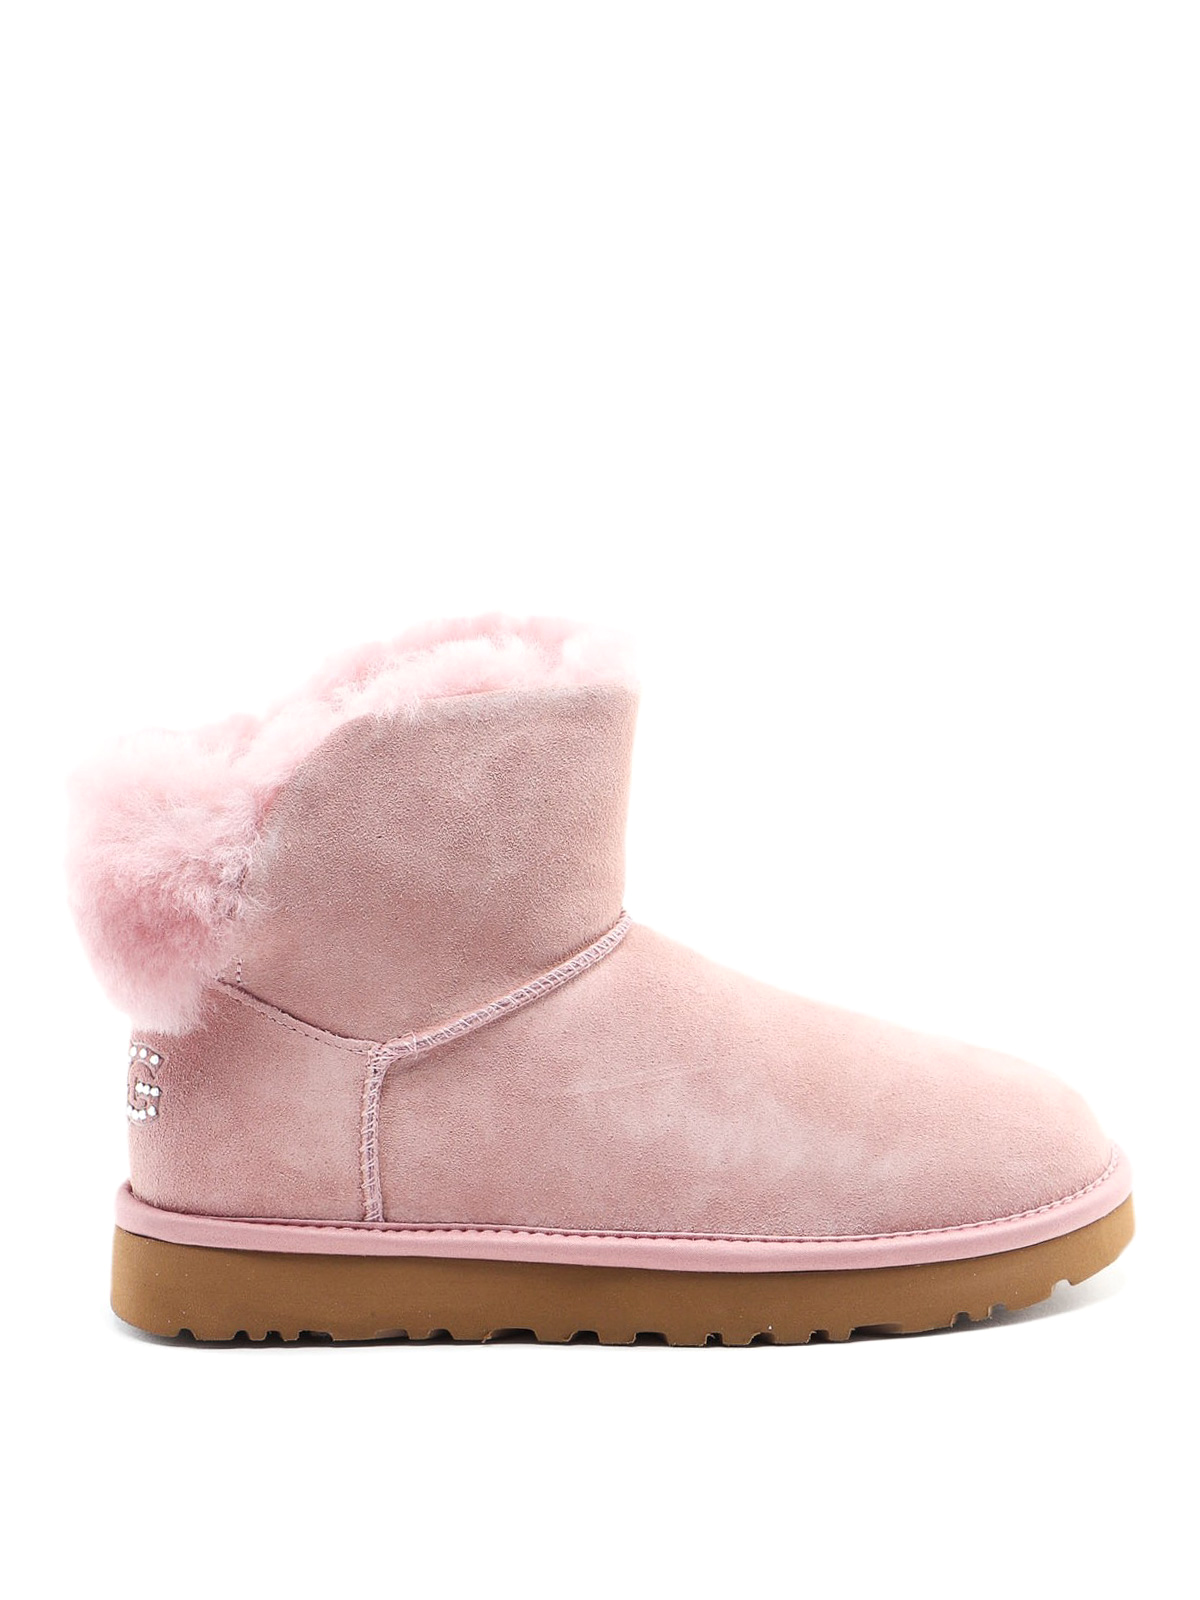 UGG CLASSIC BLING MINI PINK BOOTIES